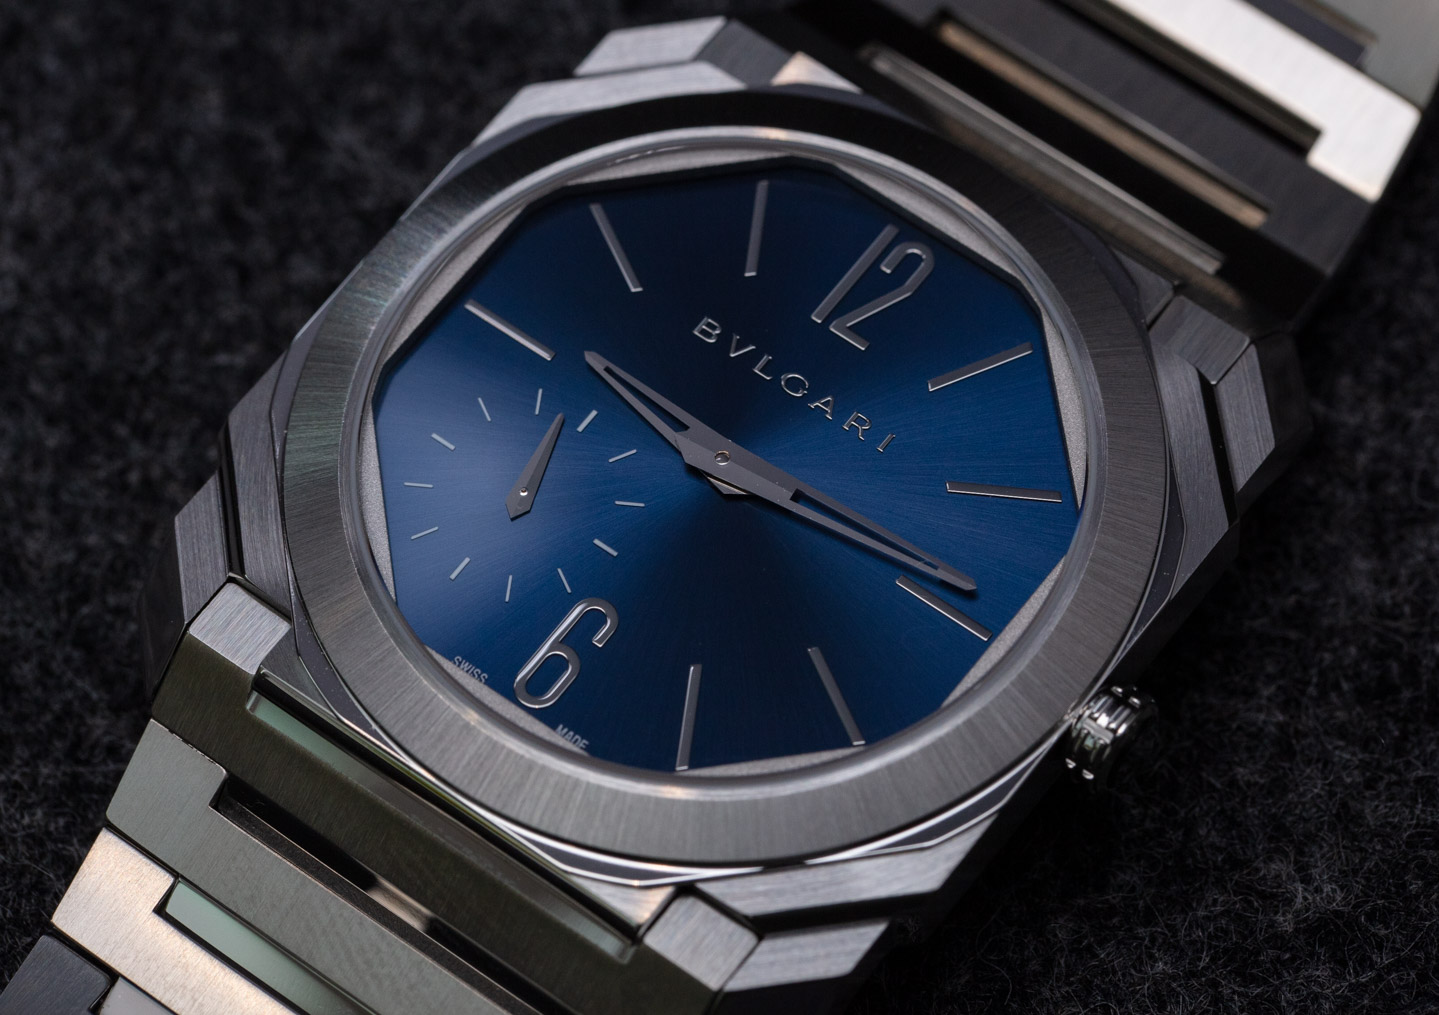 Hands-On: BVLGARI Octo Finissimo Automatic Steel Watch